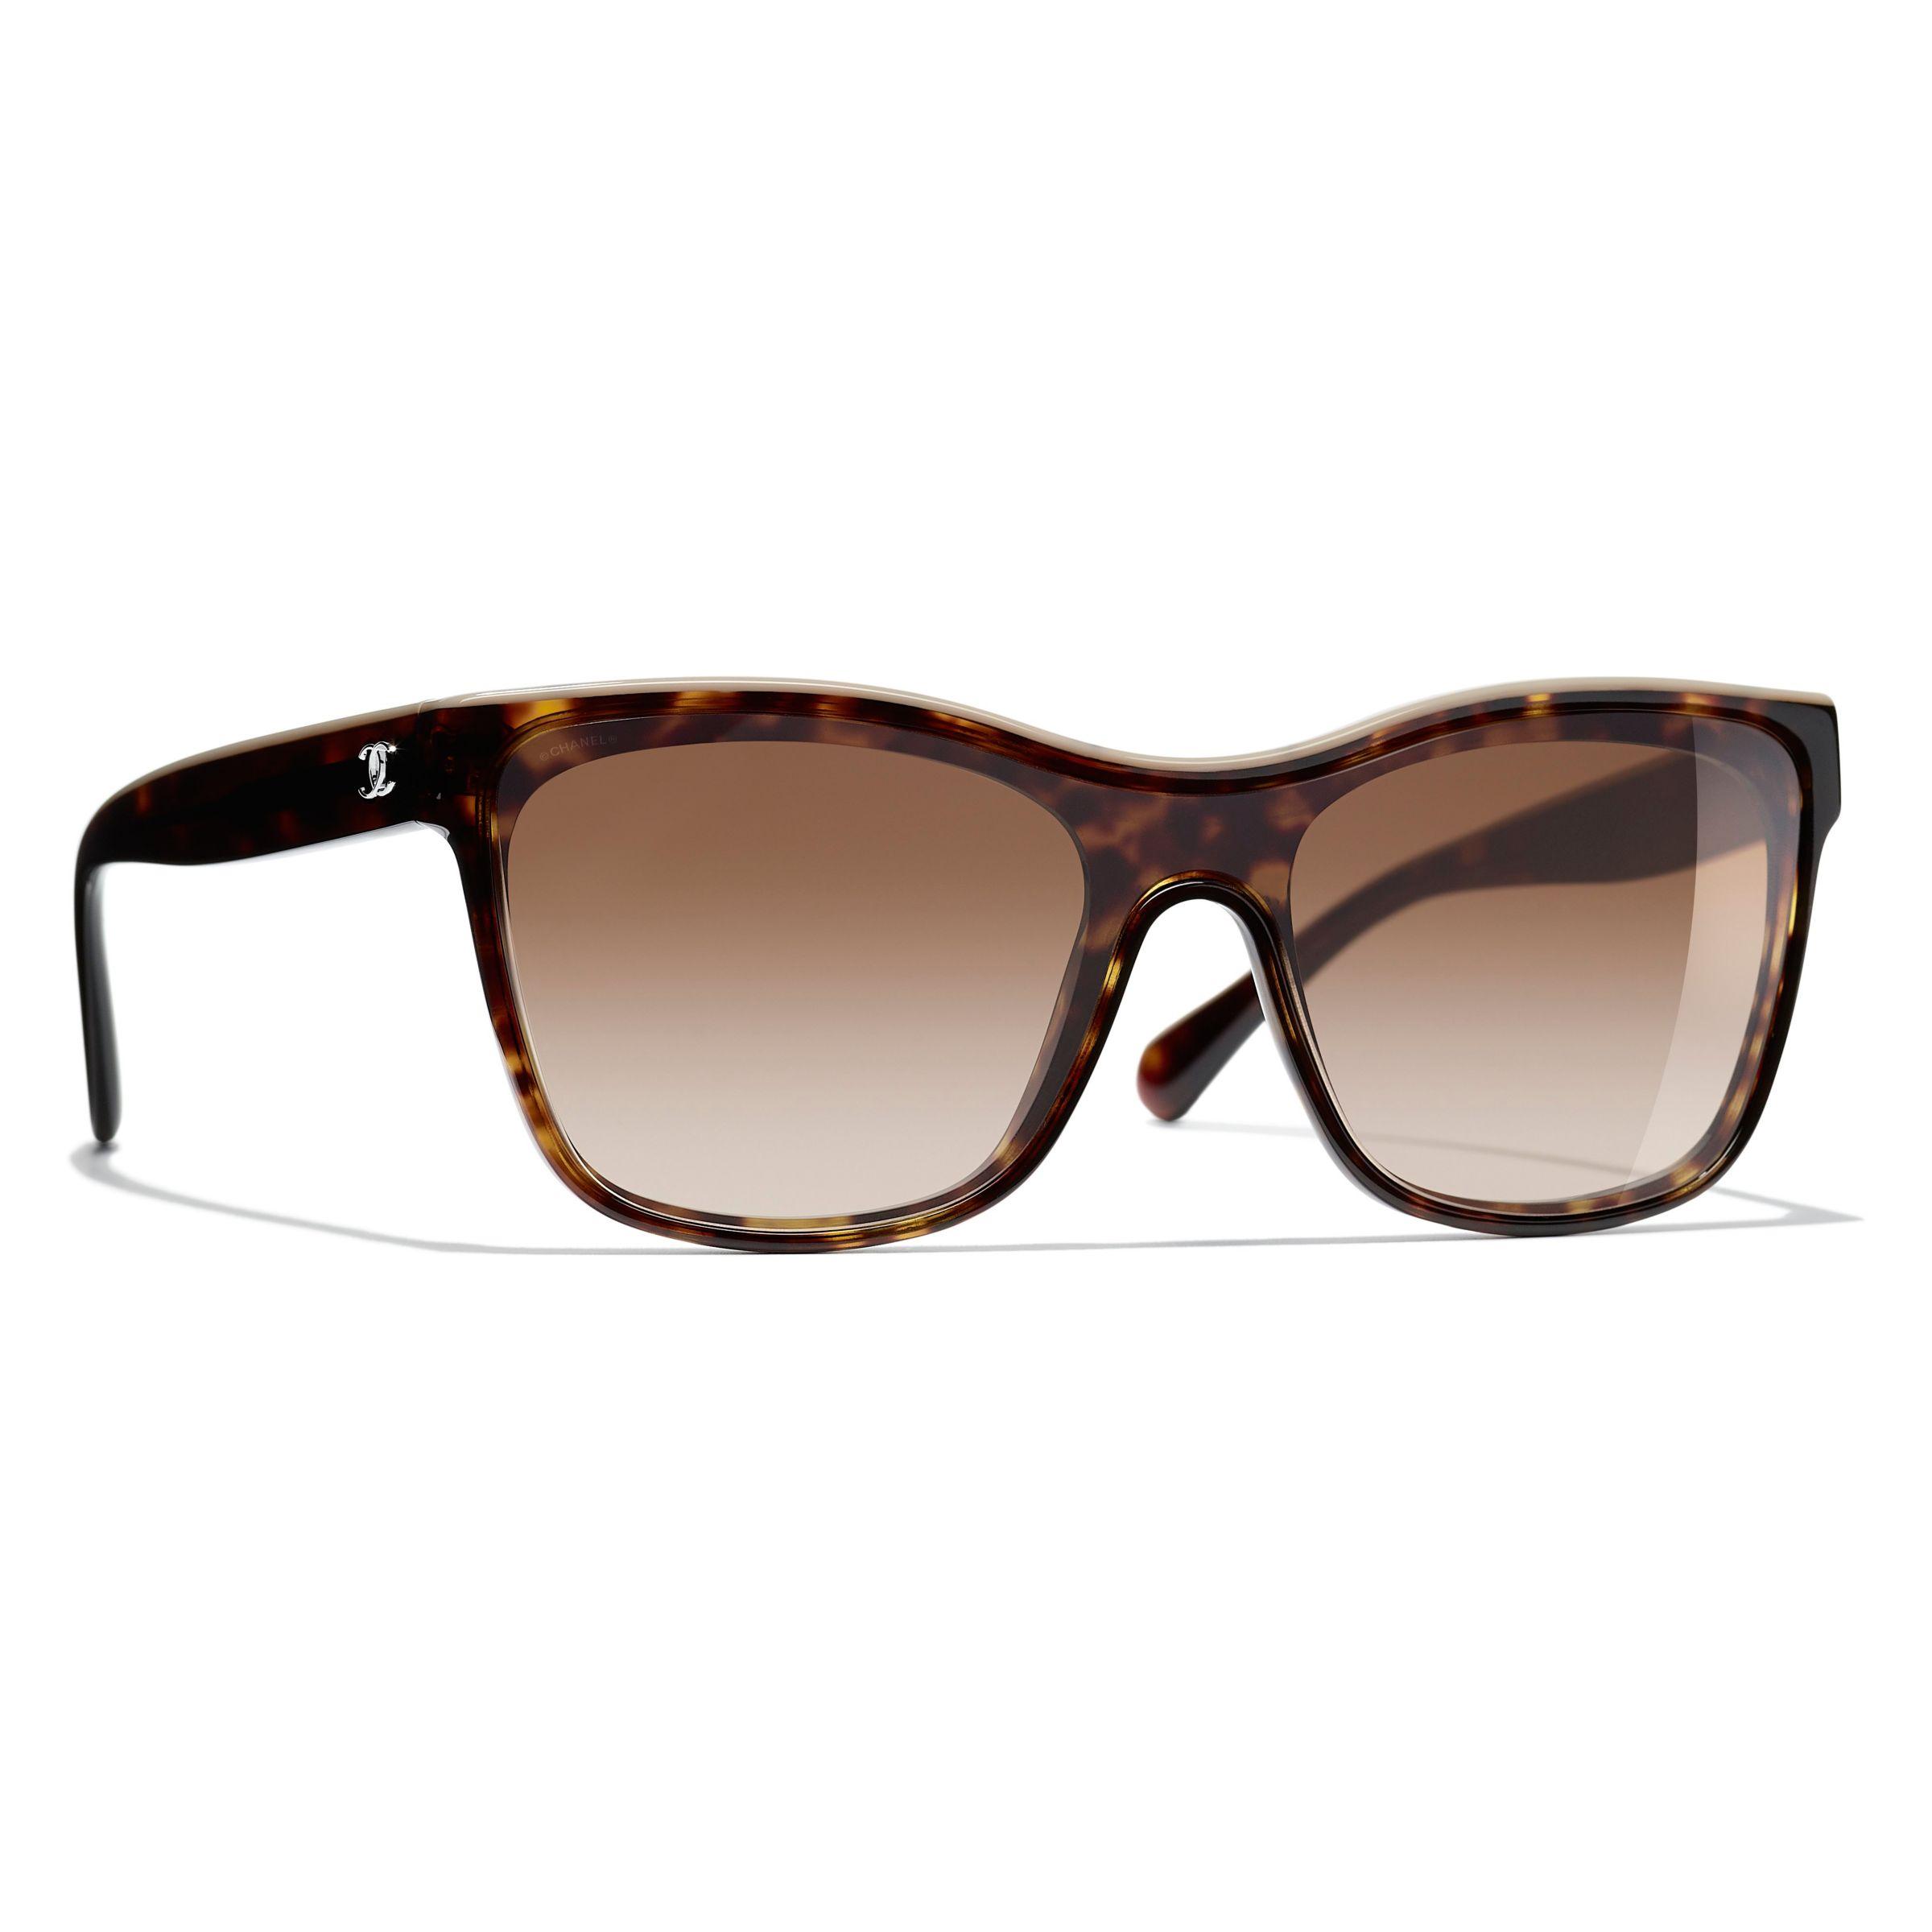 Chanel Oval Sunglasses Ch5450 in Brown